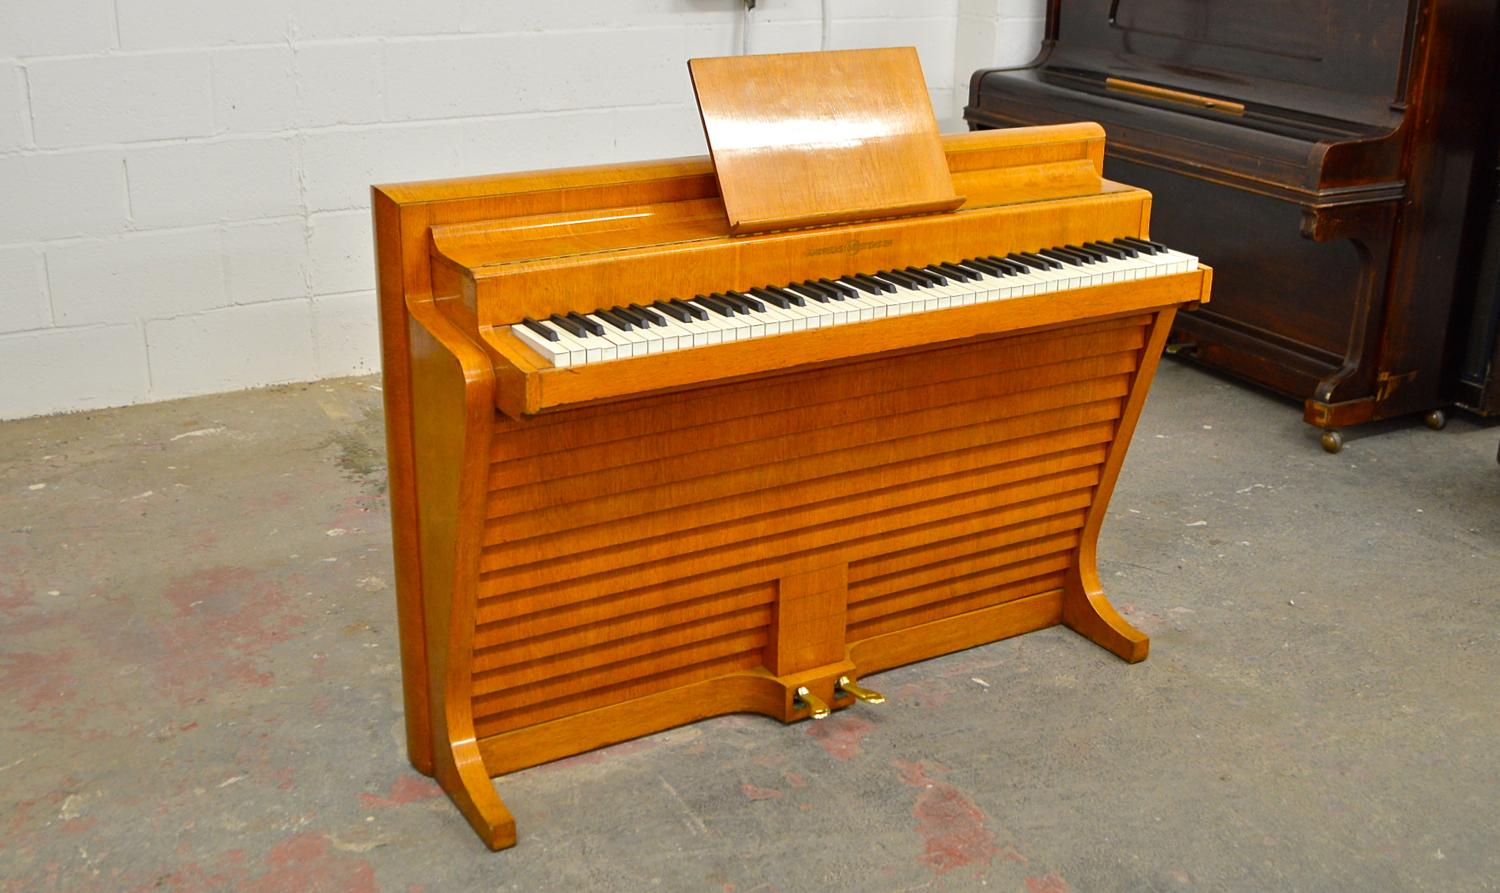 The thing that immediately strikes you with this piano designed by Poul Henningsen is it's striking cabinet lines, how the curves combine with the straight lines to create an item of true beauty. The bottom board has been made in the same way as a